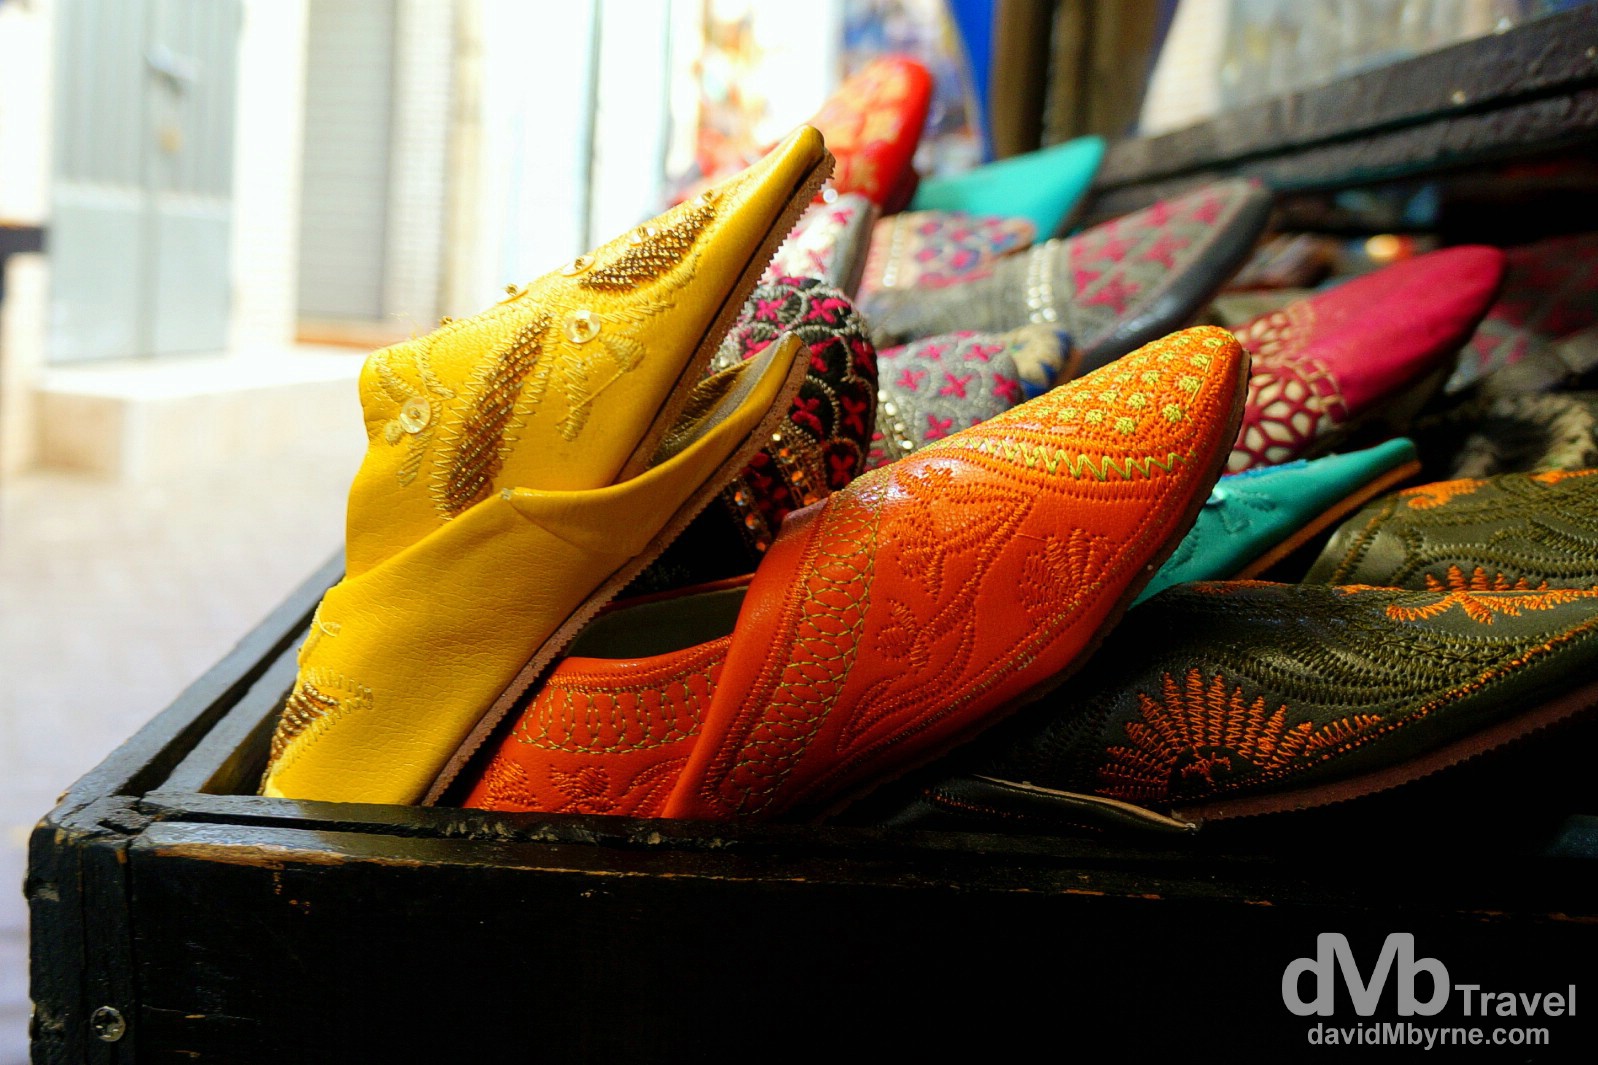 Babouche, Moroccan slippers, on sale in a lane of the Medina in Tangier, Morocco. June 3rd, 2014.